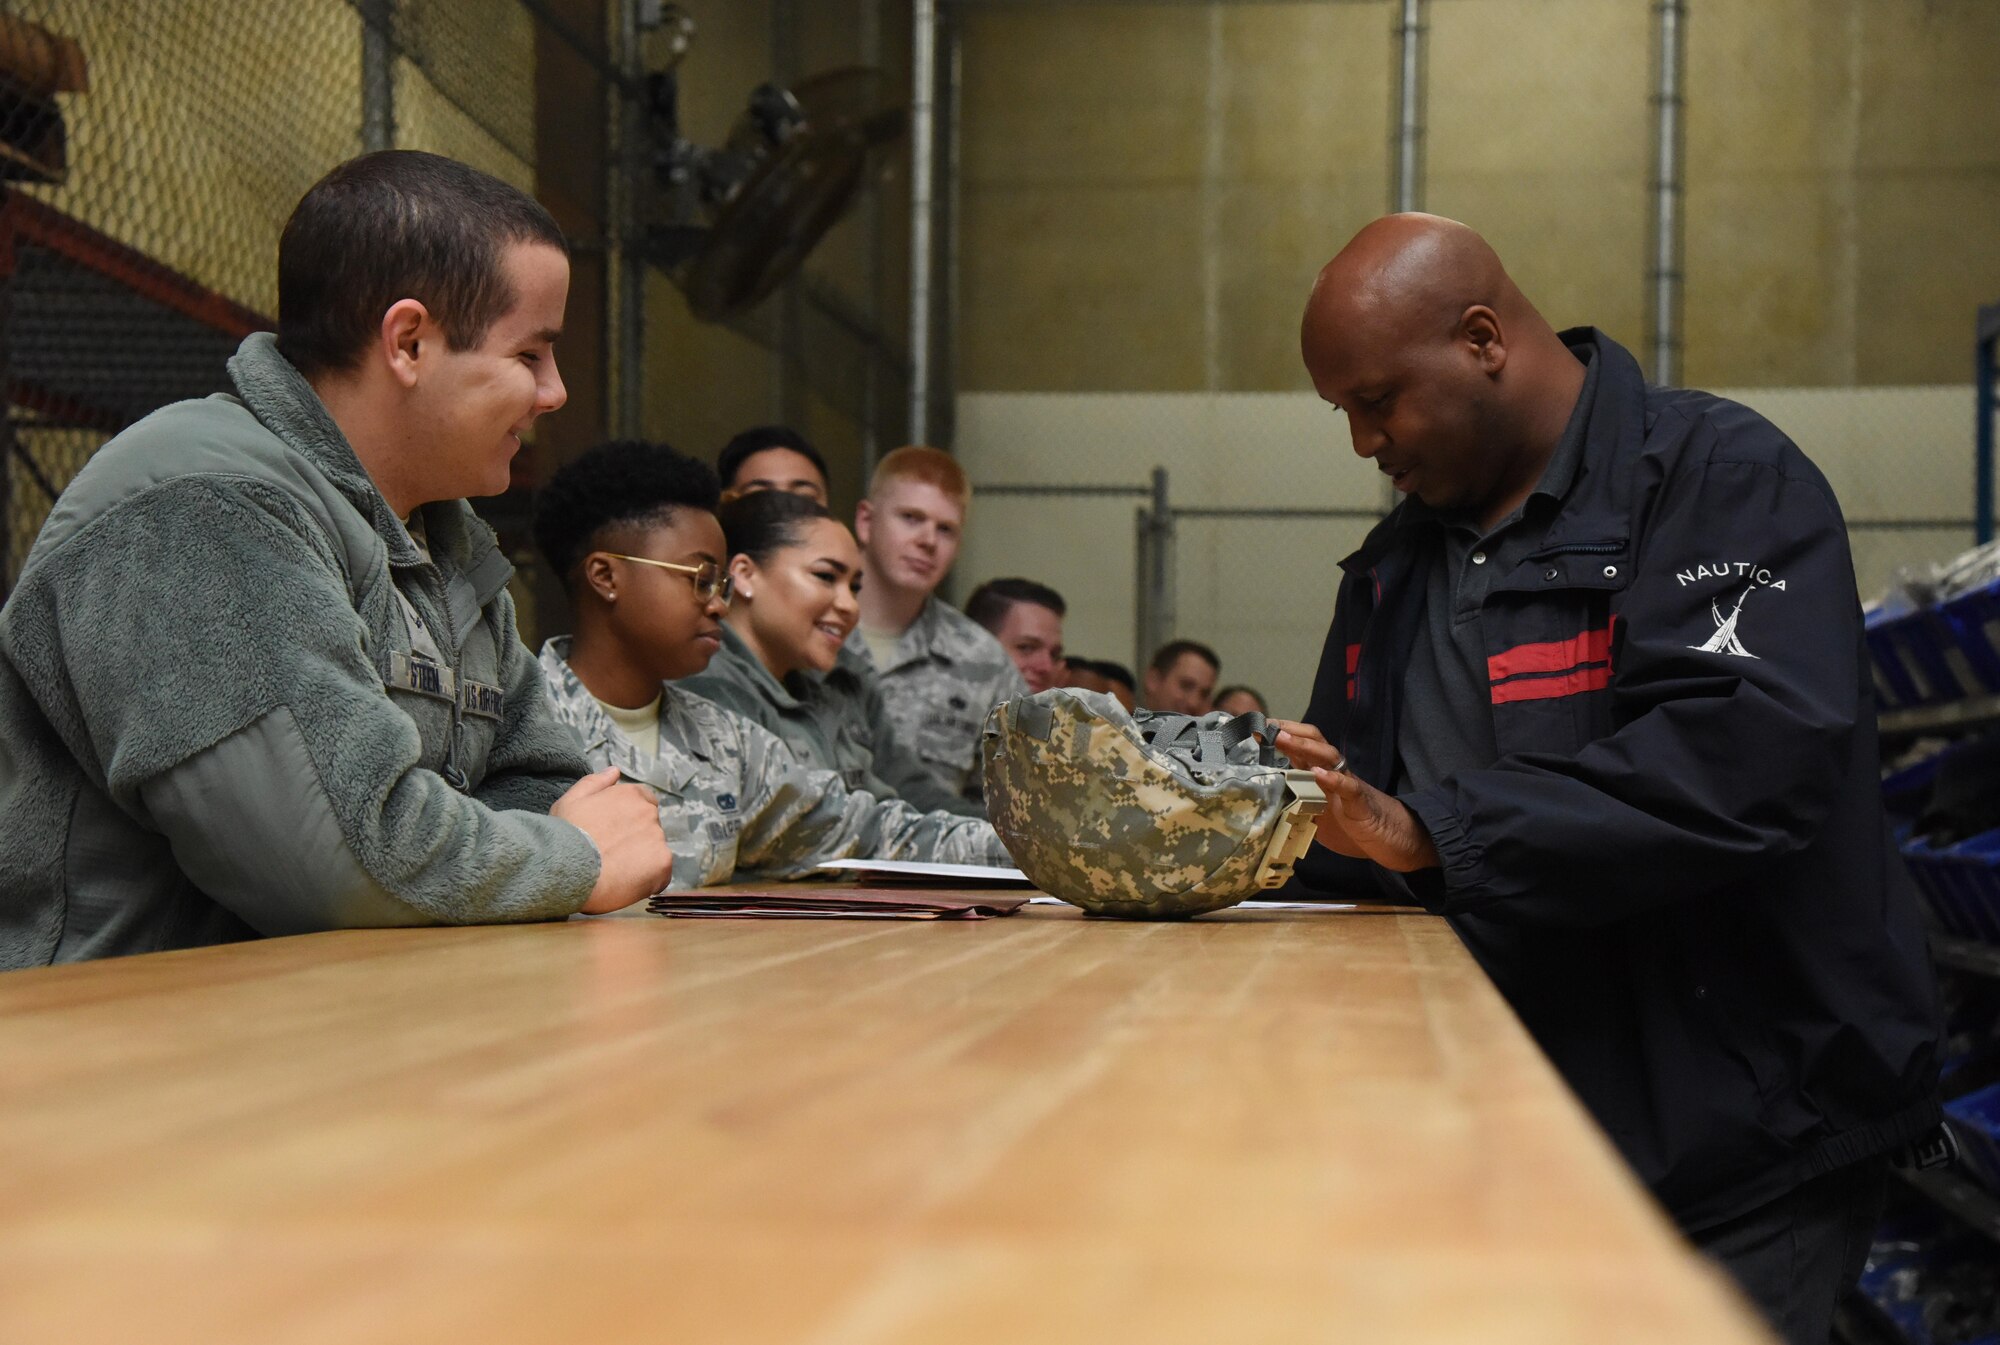 Airman 1st Class John Steen, 81st Logistics Readiness Squadron vehicle operator, receives his mobility bag items from Roderick Harris, Base Operations Support supply technician, at the supply warehouse during a deployment exercise Dec. 8, 2016, on Keesler Air Force Base, Miss. The exercise scenario tested the mission readiness of Team Keesler for simultaneous world-wide deployments. (U.S. Air Force photo by Kemberly Groue)